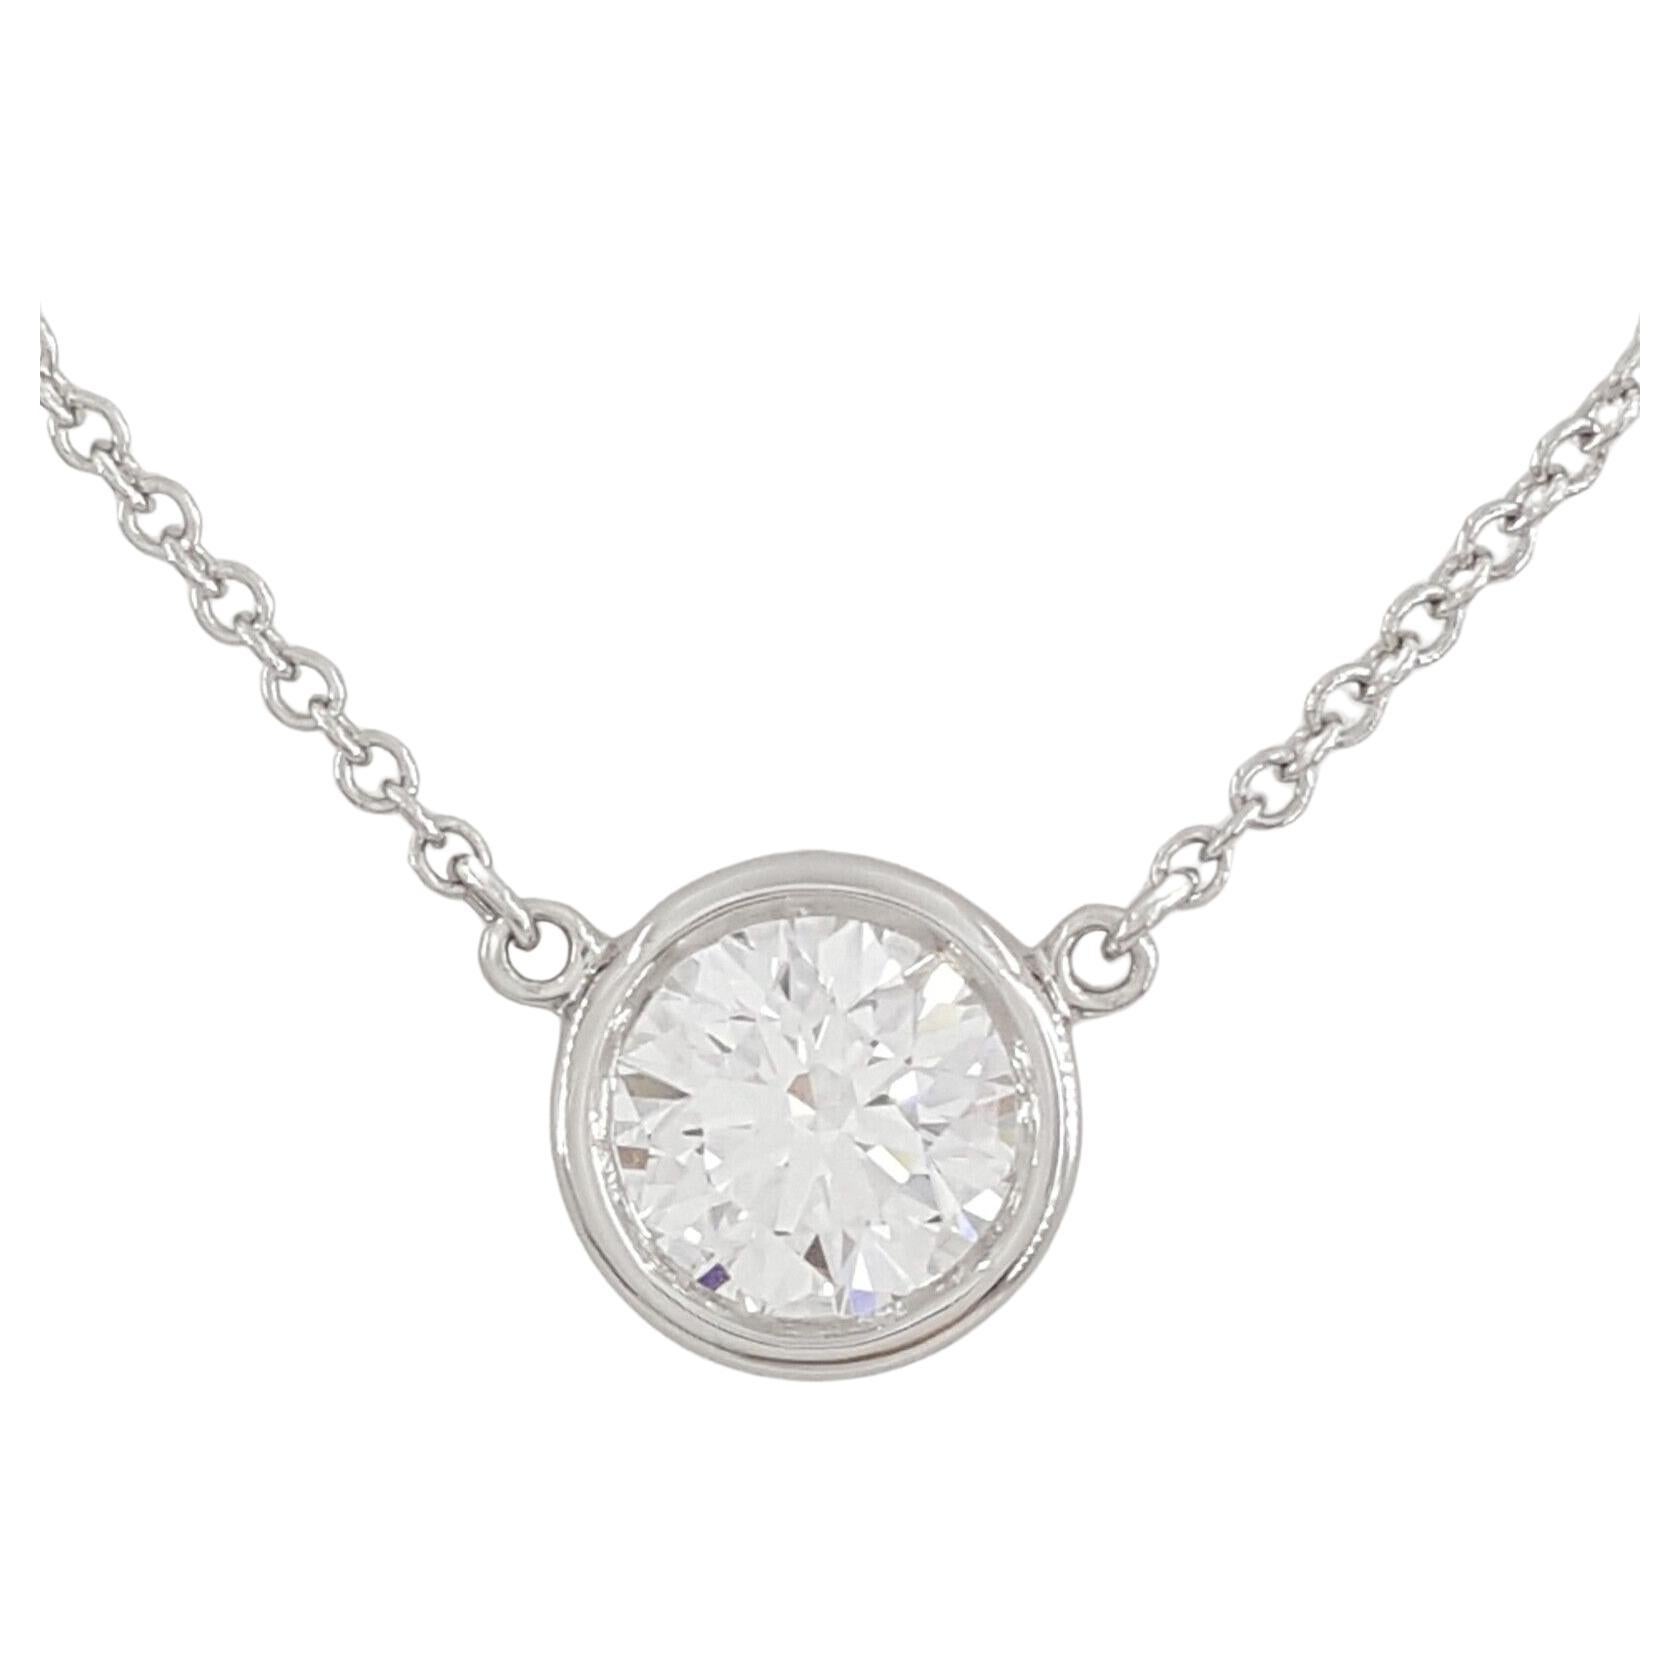 Round Cut Elsa Peretti Diamond By The Yard Necklace from Tiffany&Co. Necklace